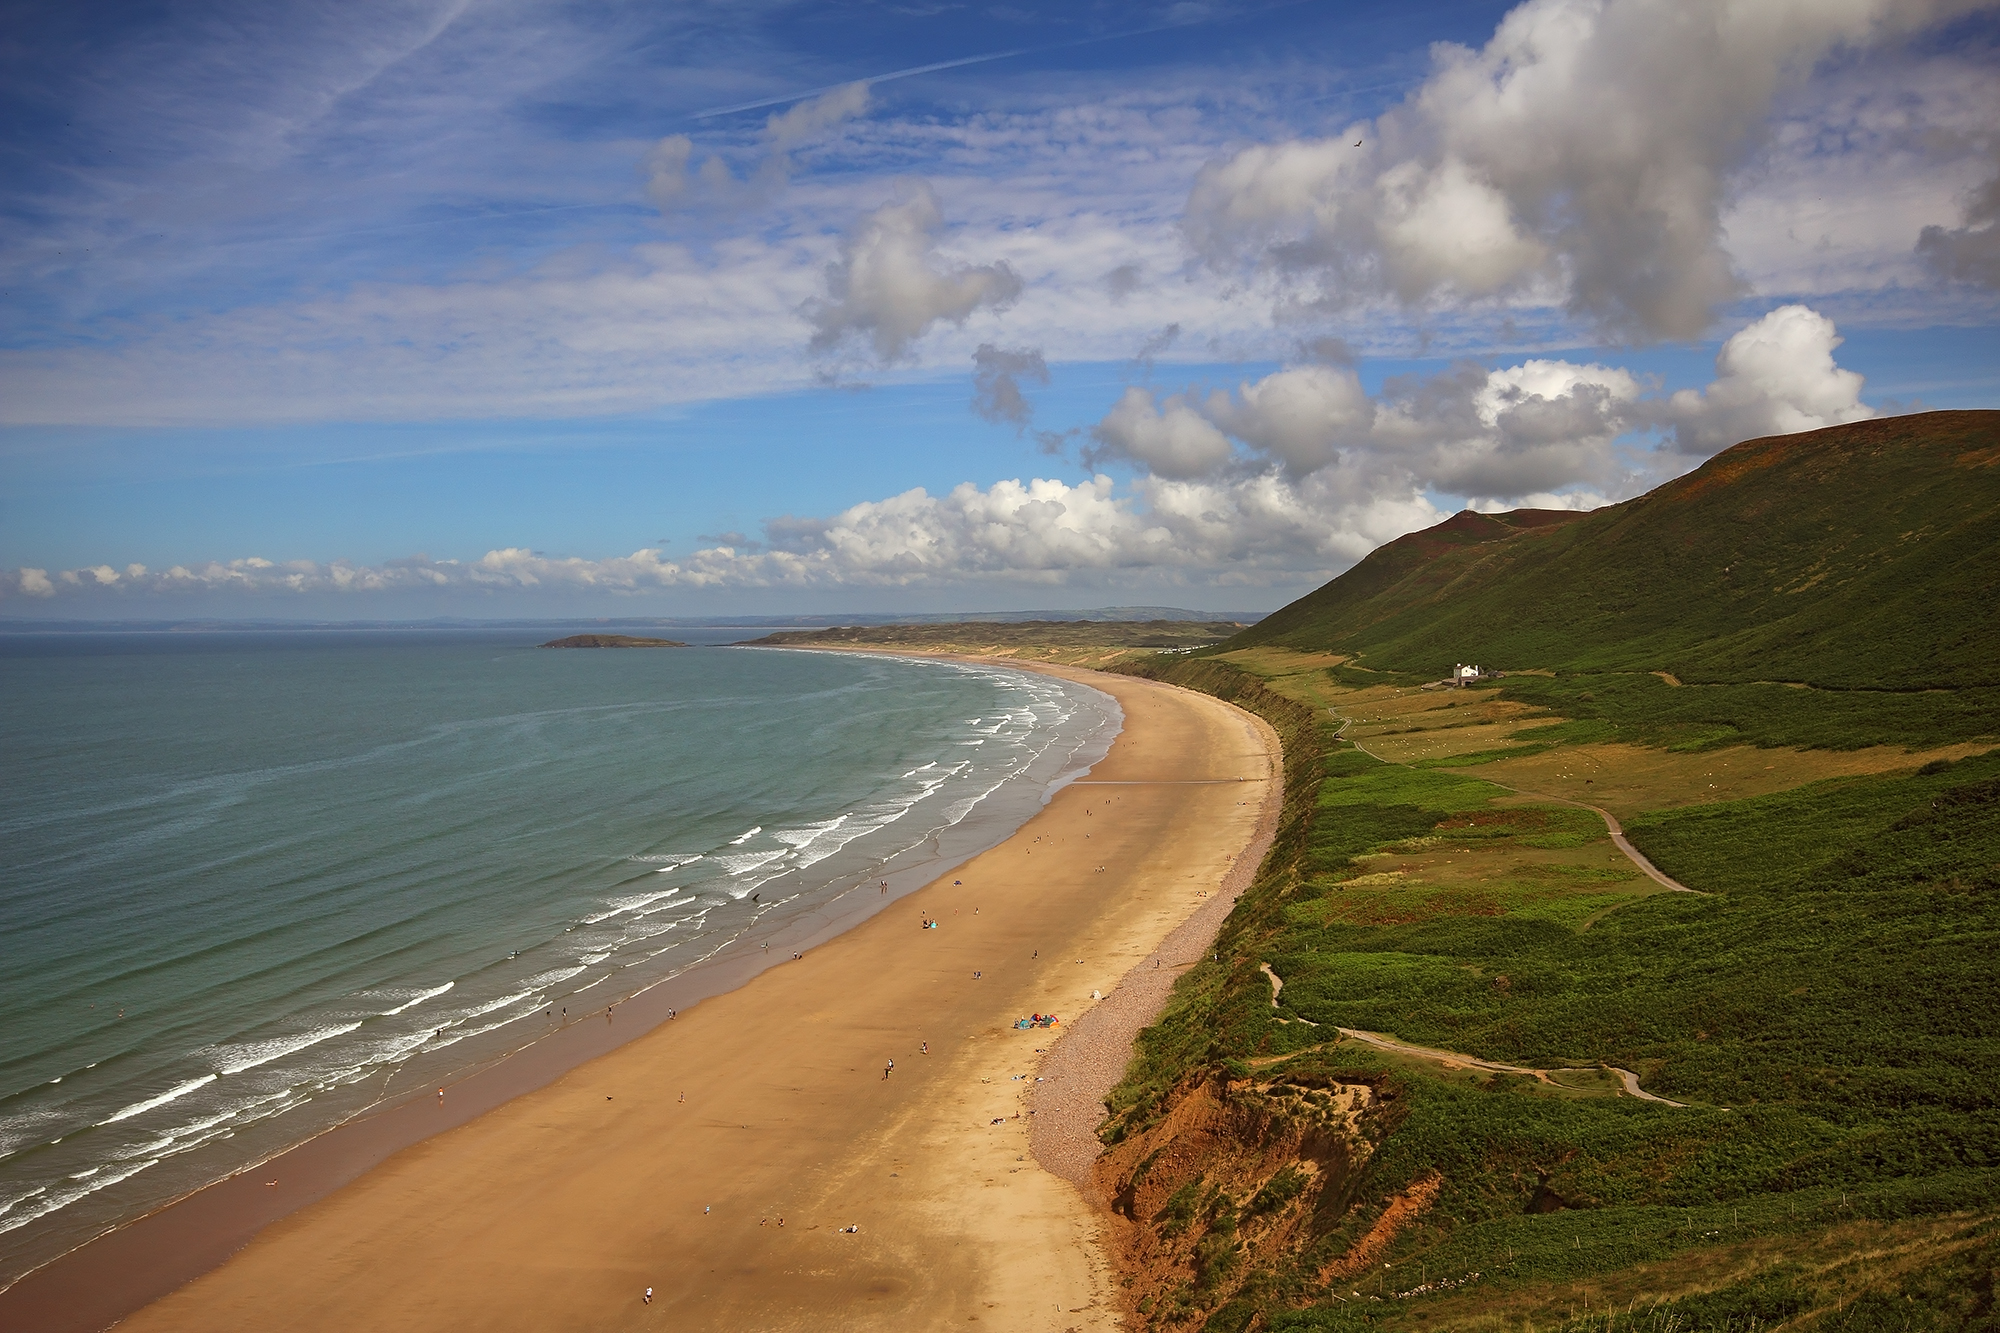 Rhossili Bay, Wales the most beautiful beach in Europe...